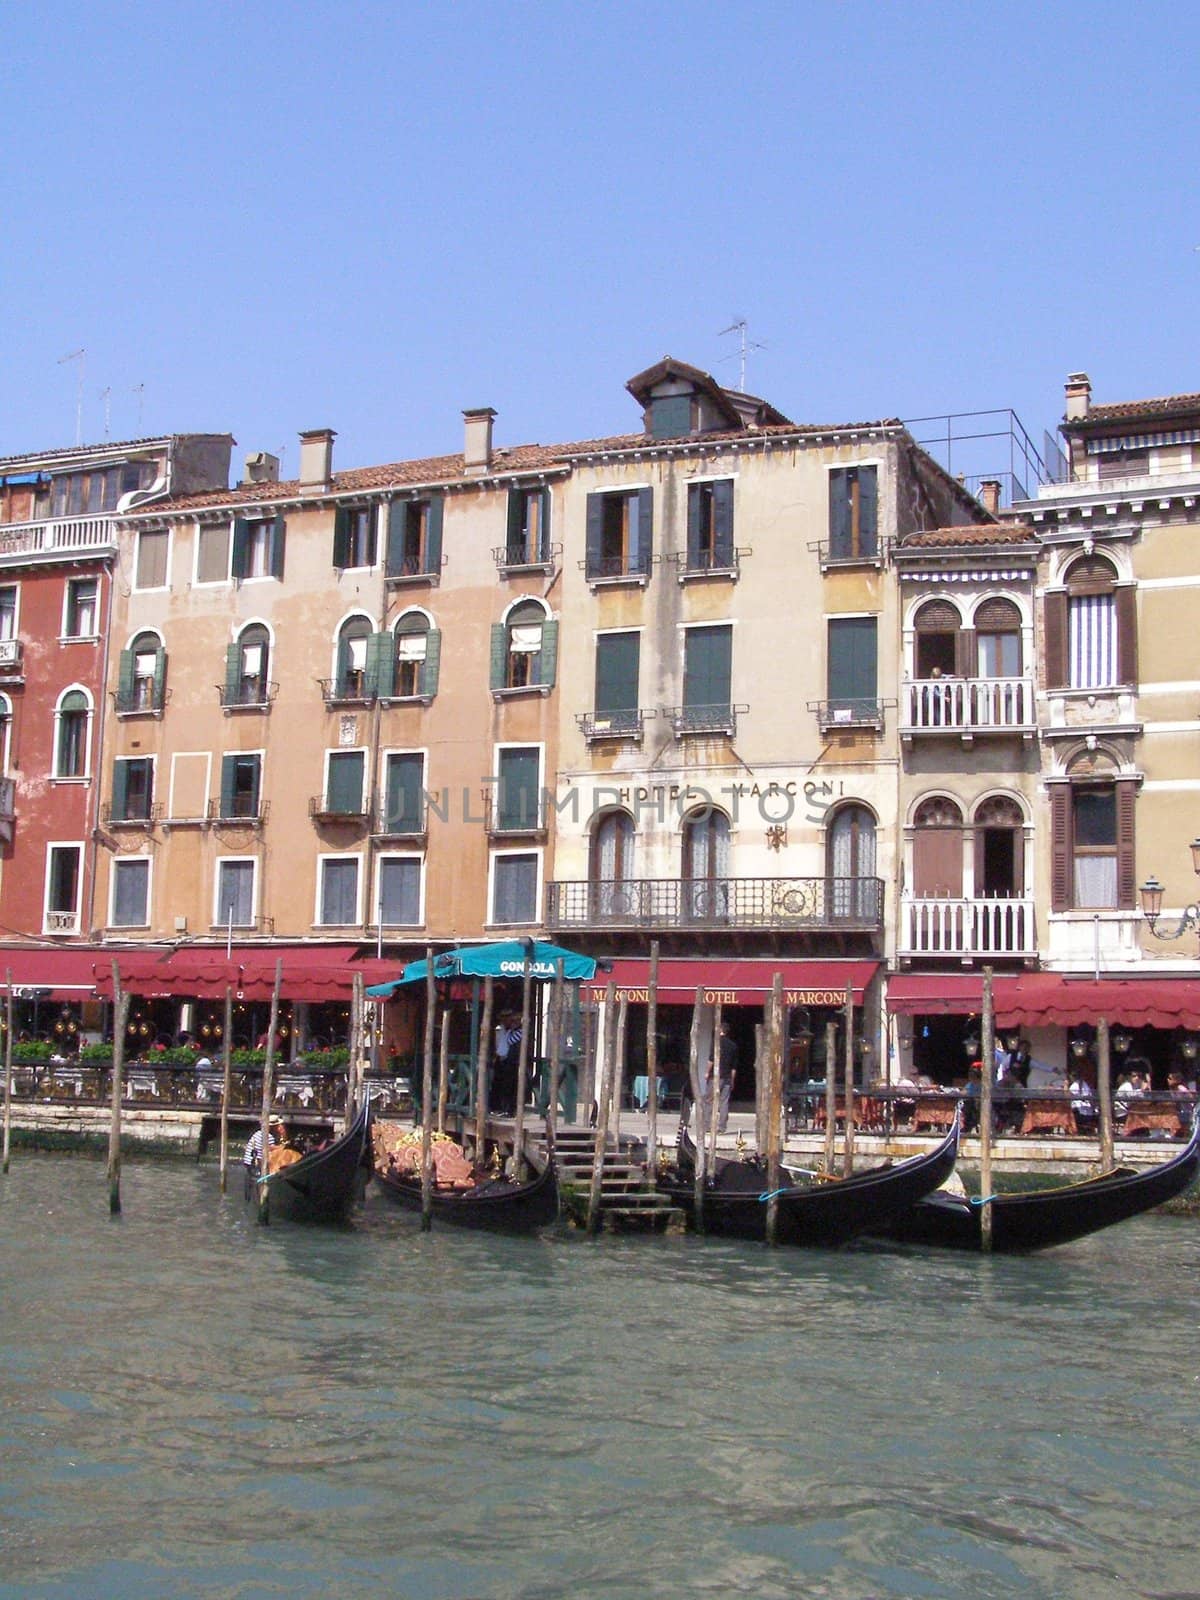 Venice, a unique and picturesque ancient town in Italy